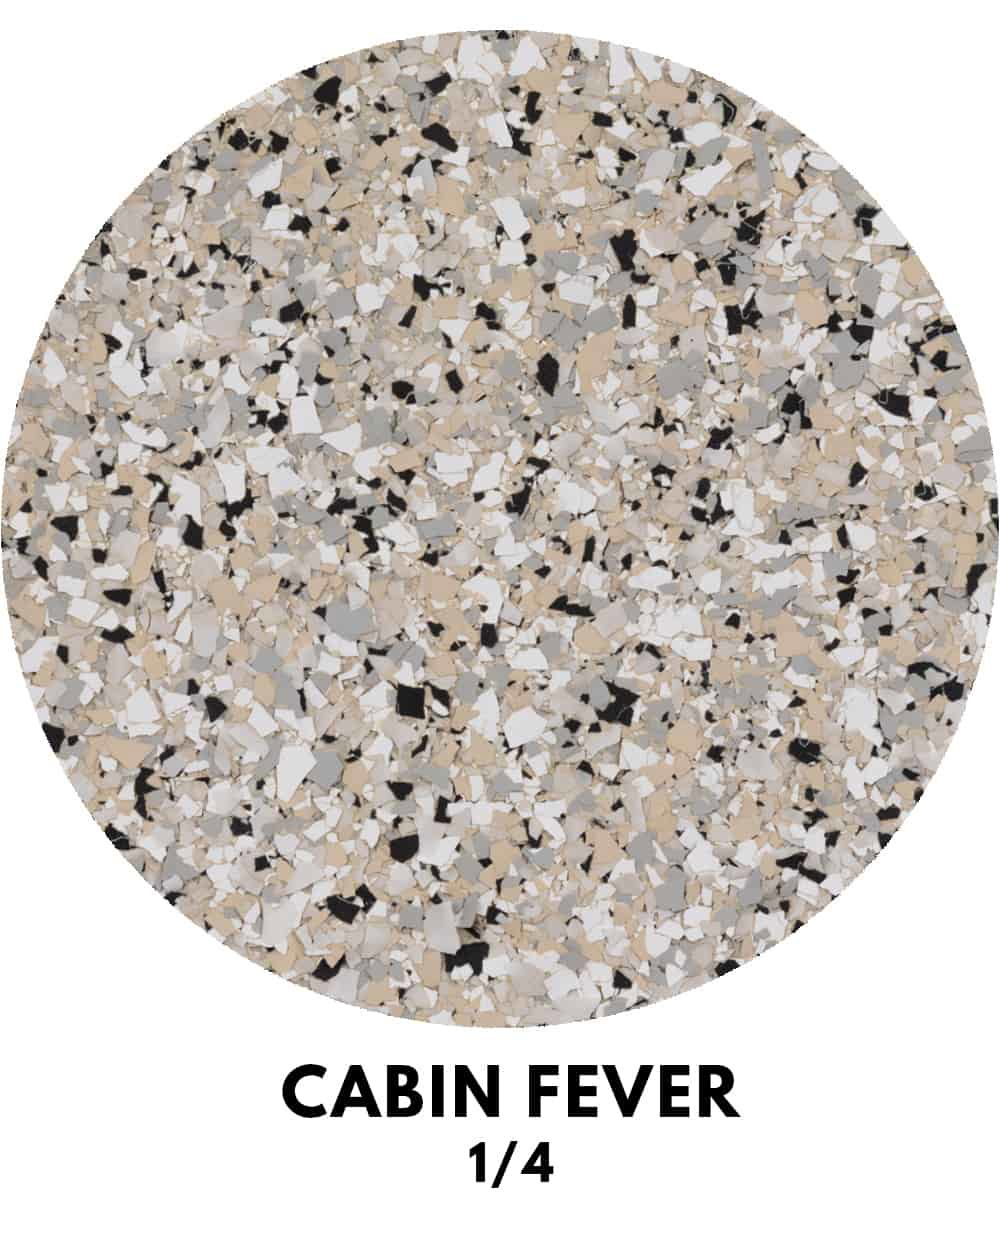 DF Cabin Fever Flakes – 55 lbs